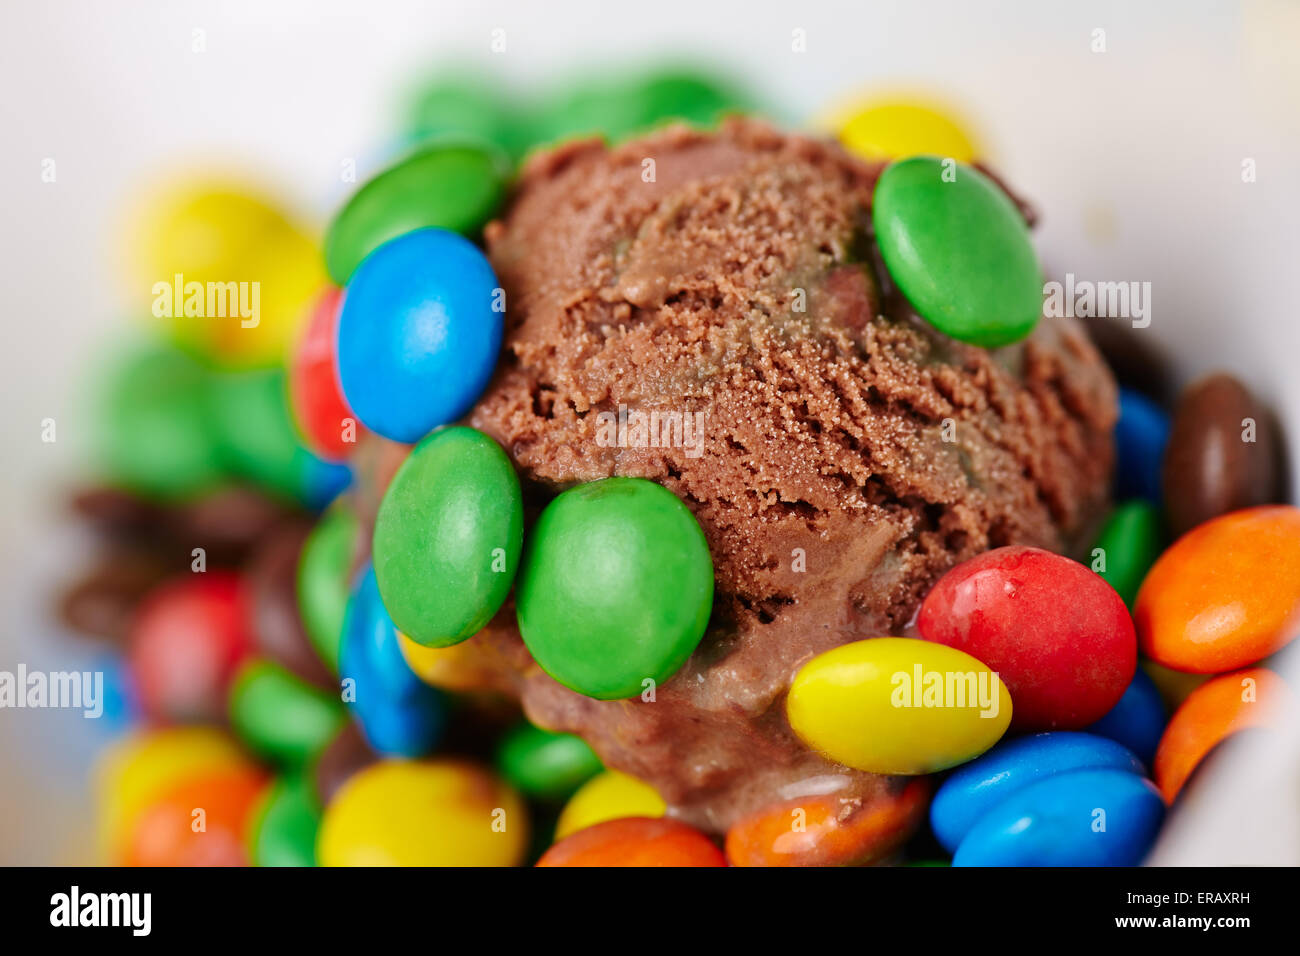 Scoop of homemade chocolate ice cream with colorful chocolate dragees Stock Photo